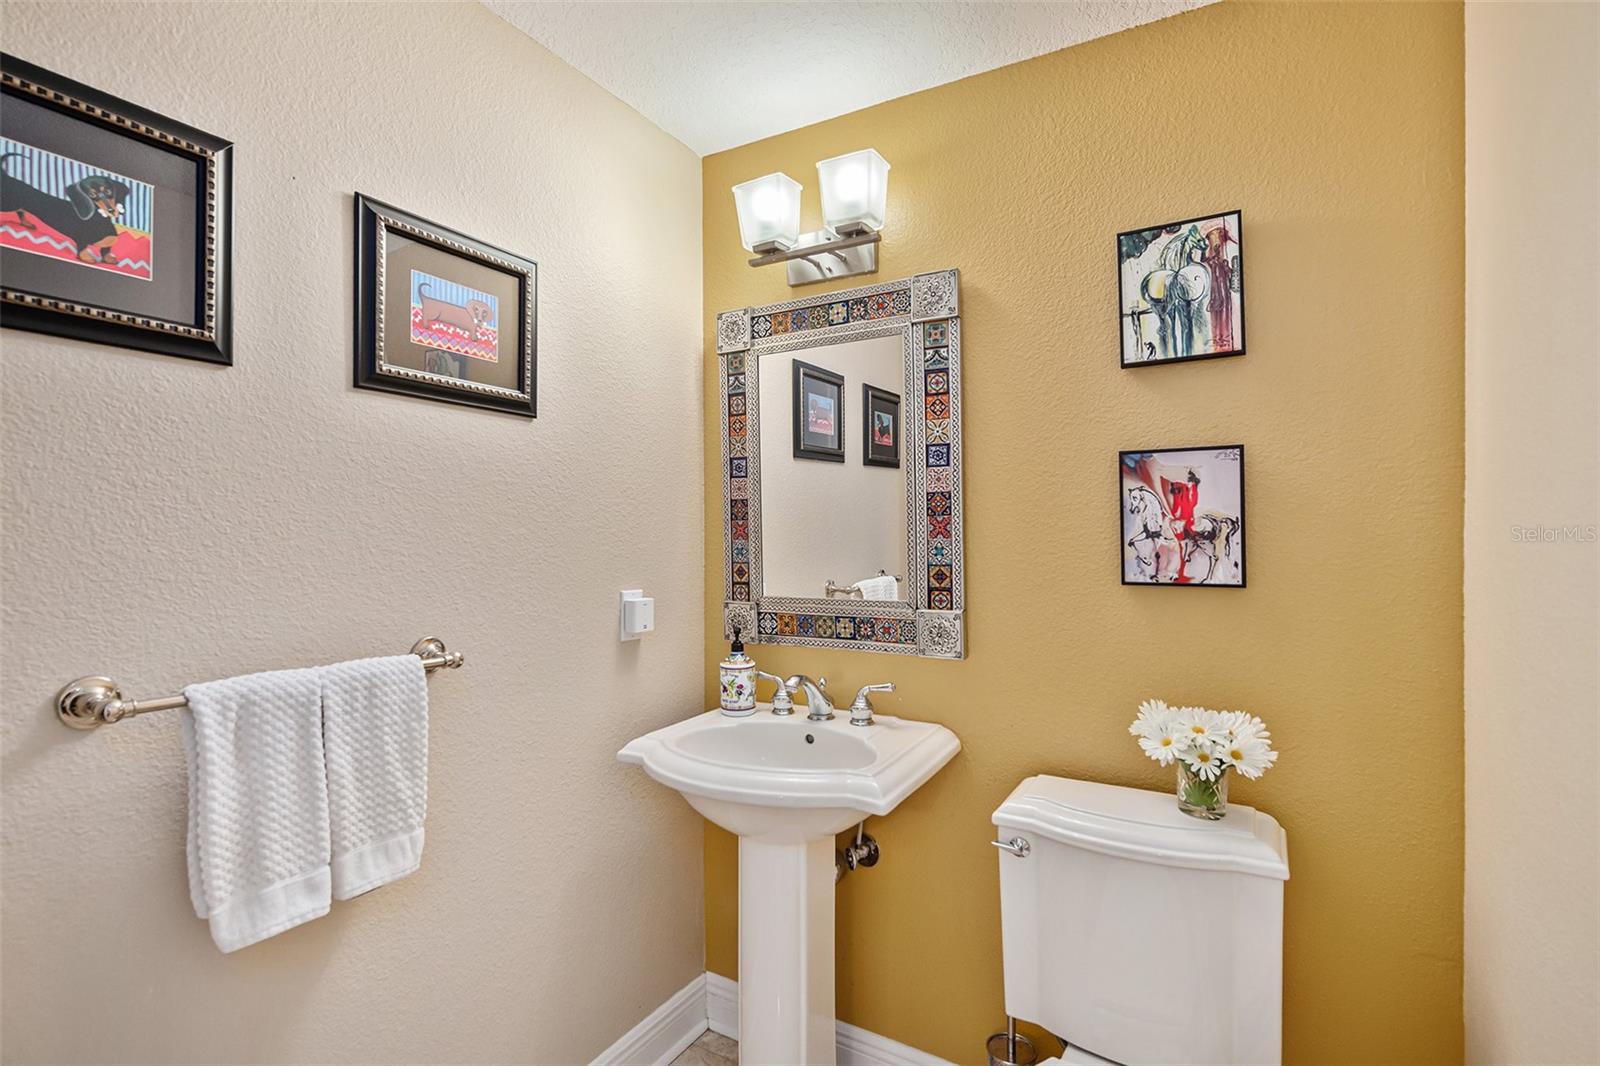 Guest Bathroom located near Great Room